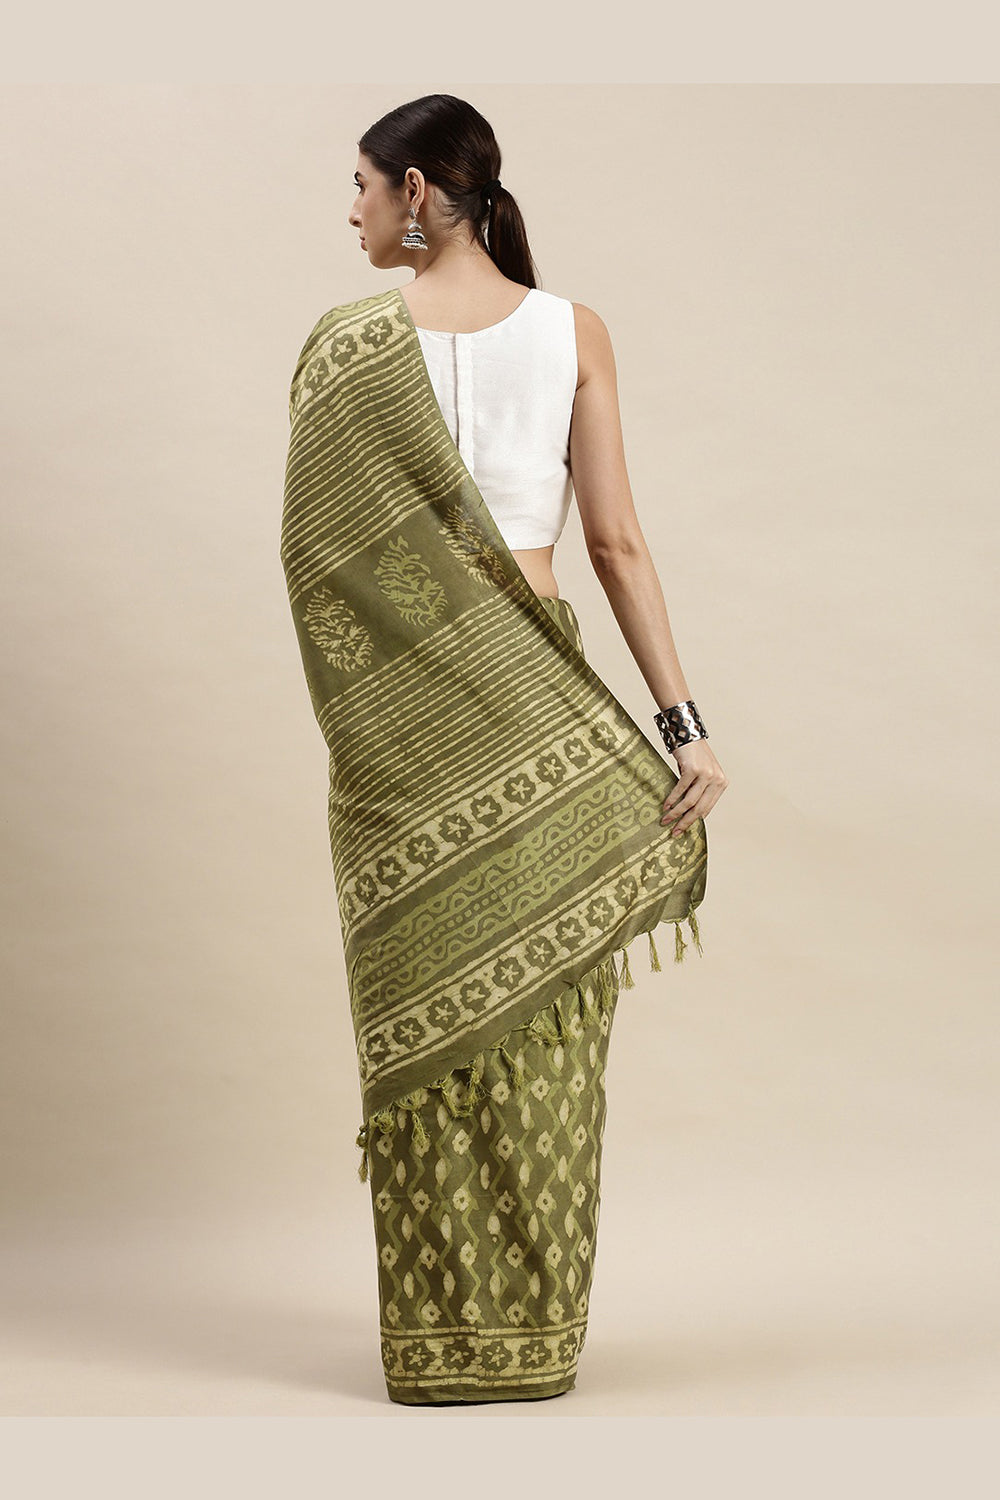 Shop Lata Green Batik Print Art Silk One Minute Saree at best offer at our  Store - One Minute Saree